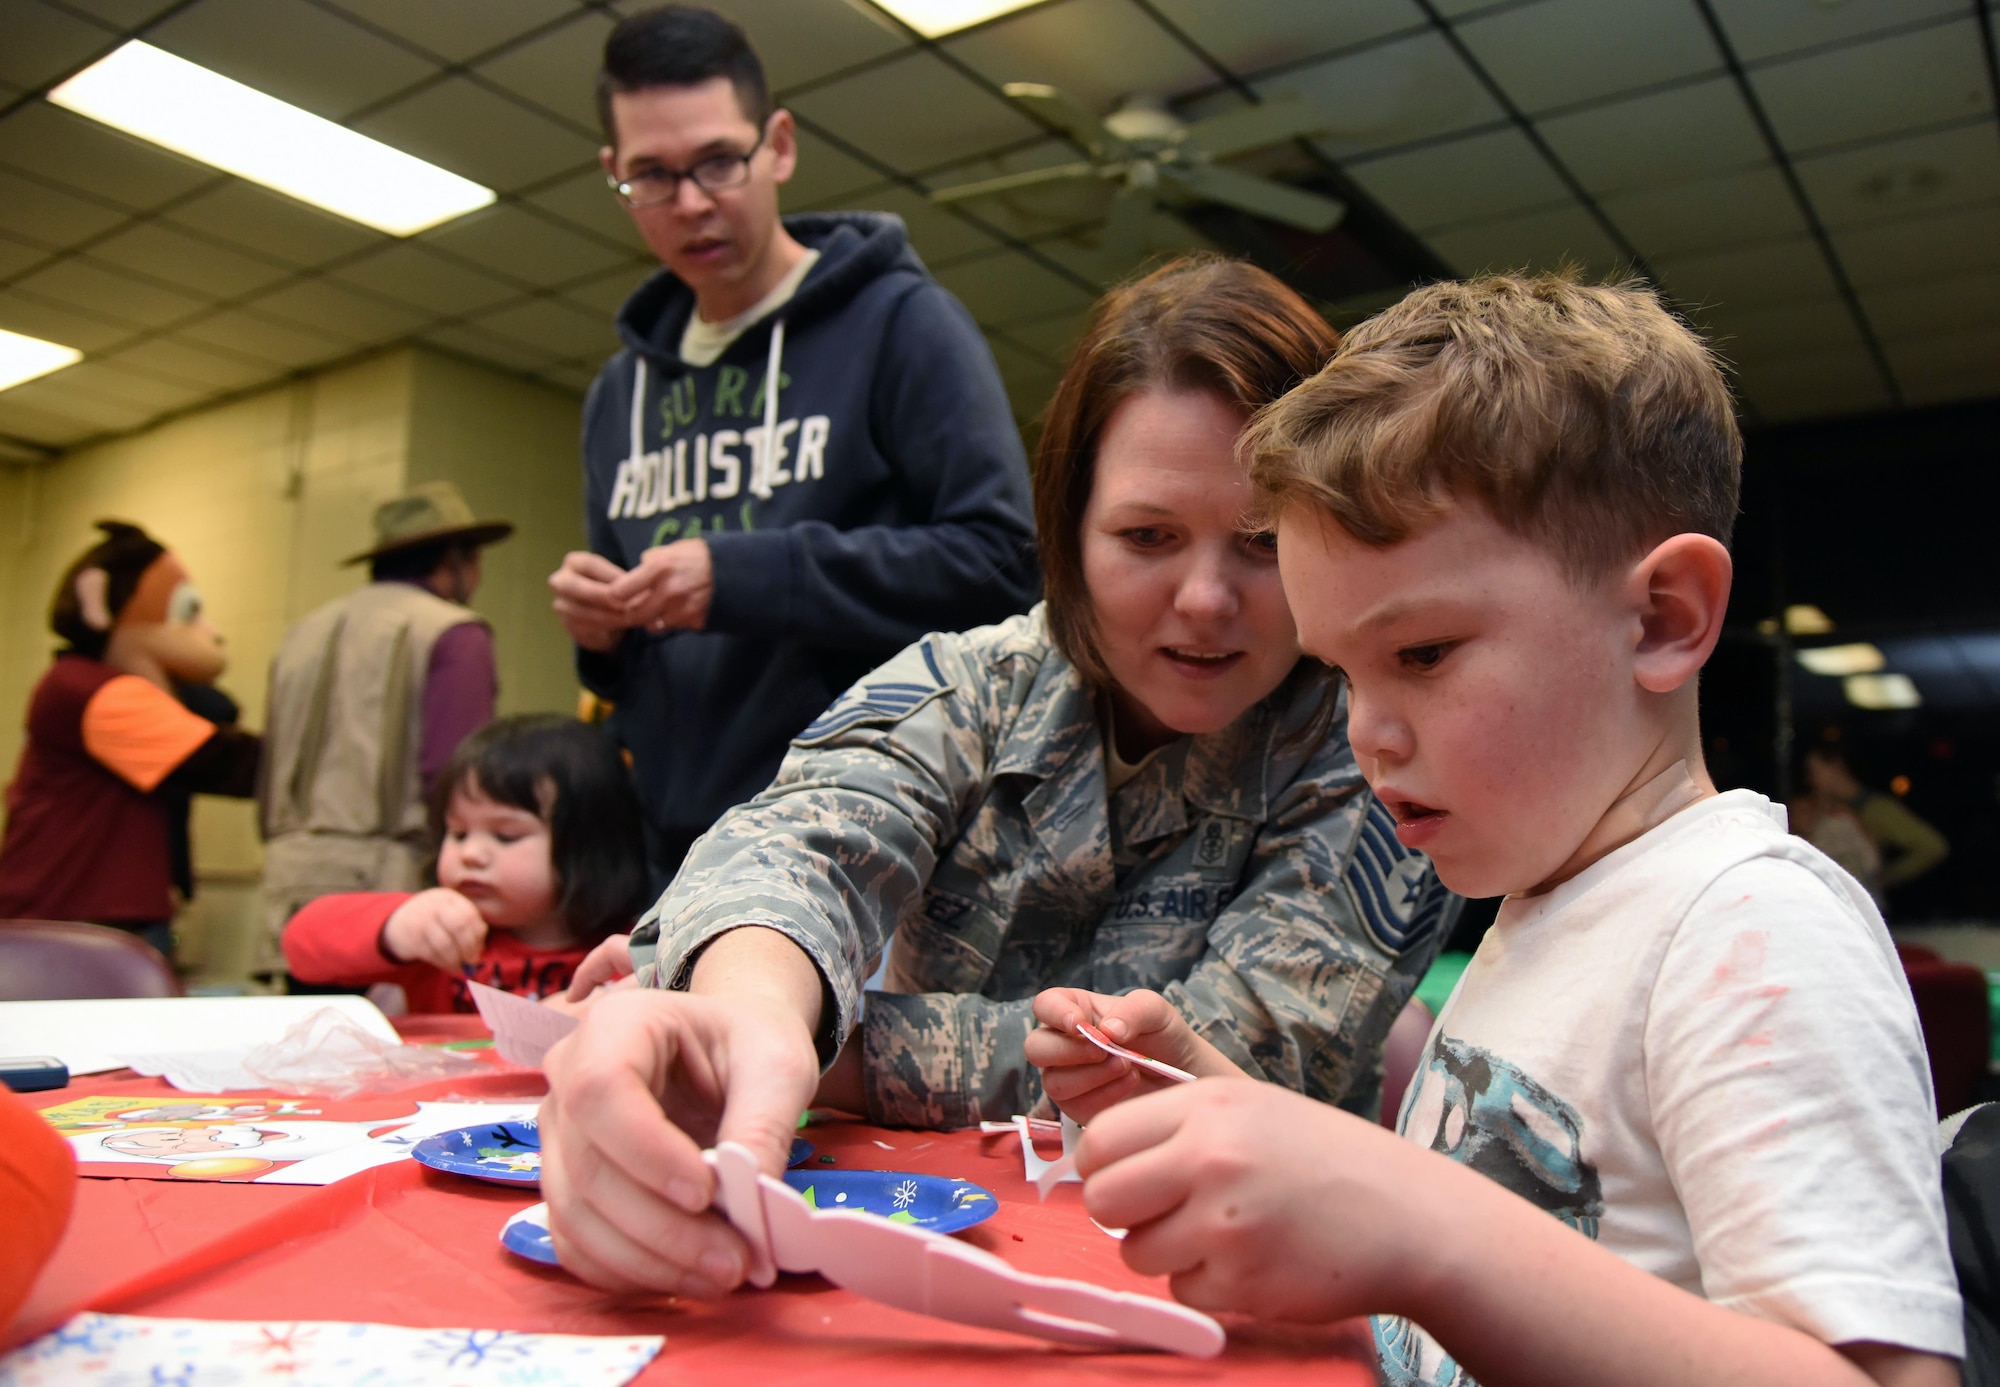 U.S. Air Force Master Sgt. Victoria Cortez, 81st Force Support Squadron Airman and Family Readiness Center NCO in charge, assists her son, Alex, with assembling an ornament during Christmas in the Park at Keesler Air Force Base, Mississippi, Dec. 6, 2018. The event hosted by Outdoor Recreation included cookie and ornament decorating, games and visits with Santa. (U.S. Air Force photo by Kemberly Groue)